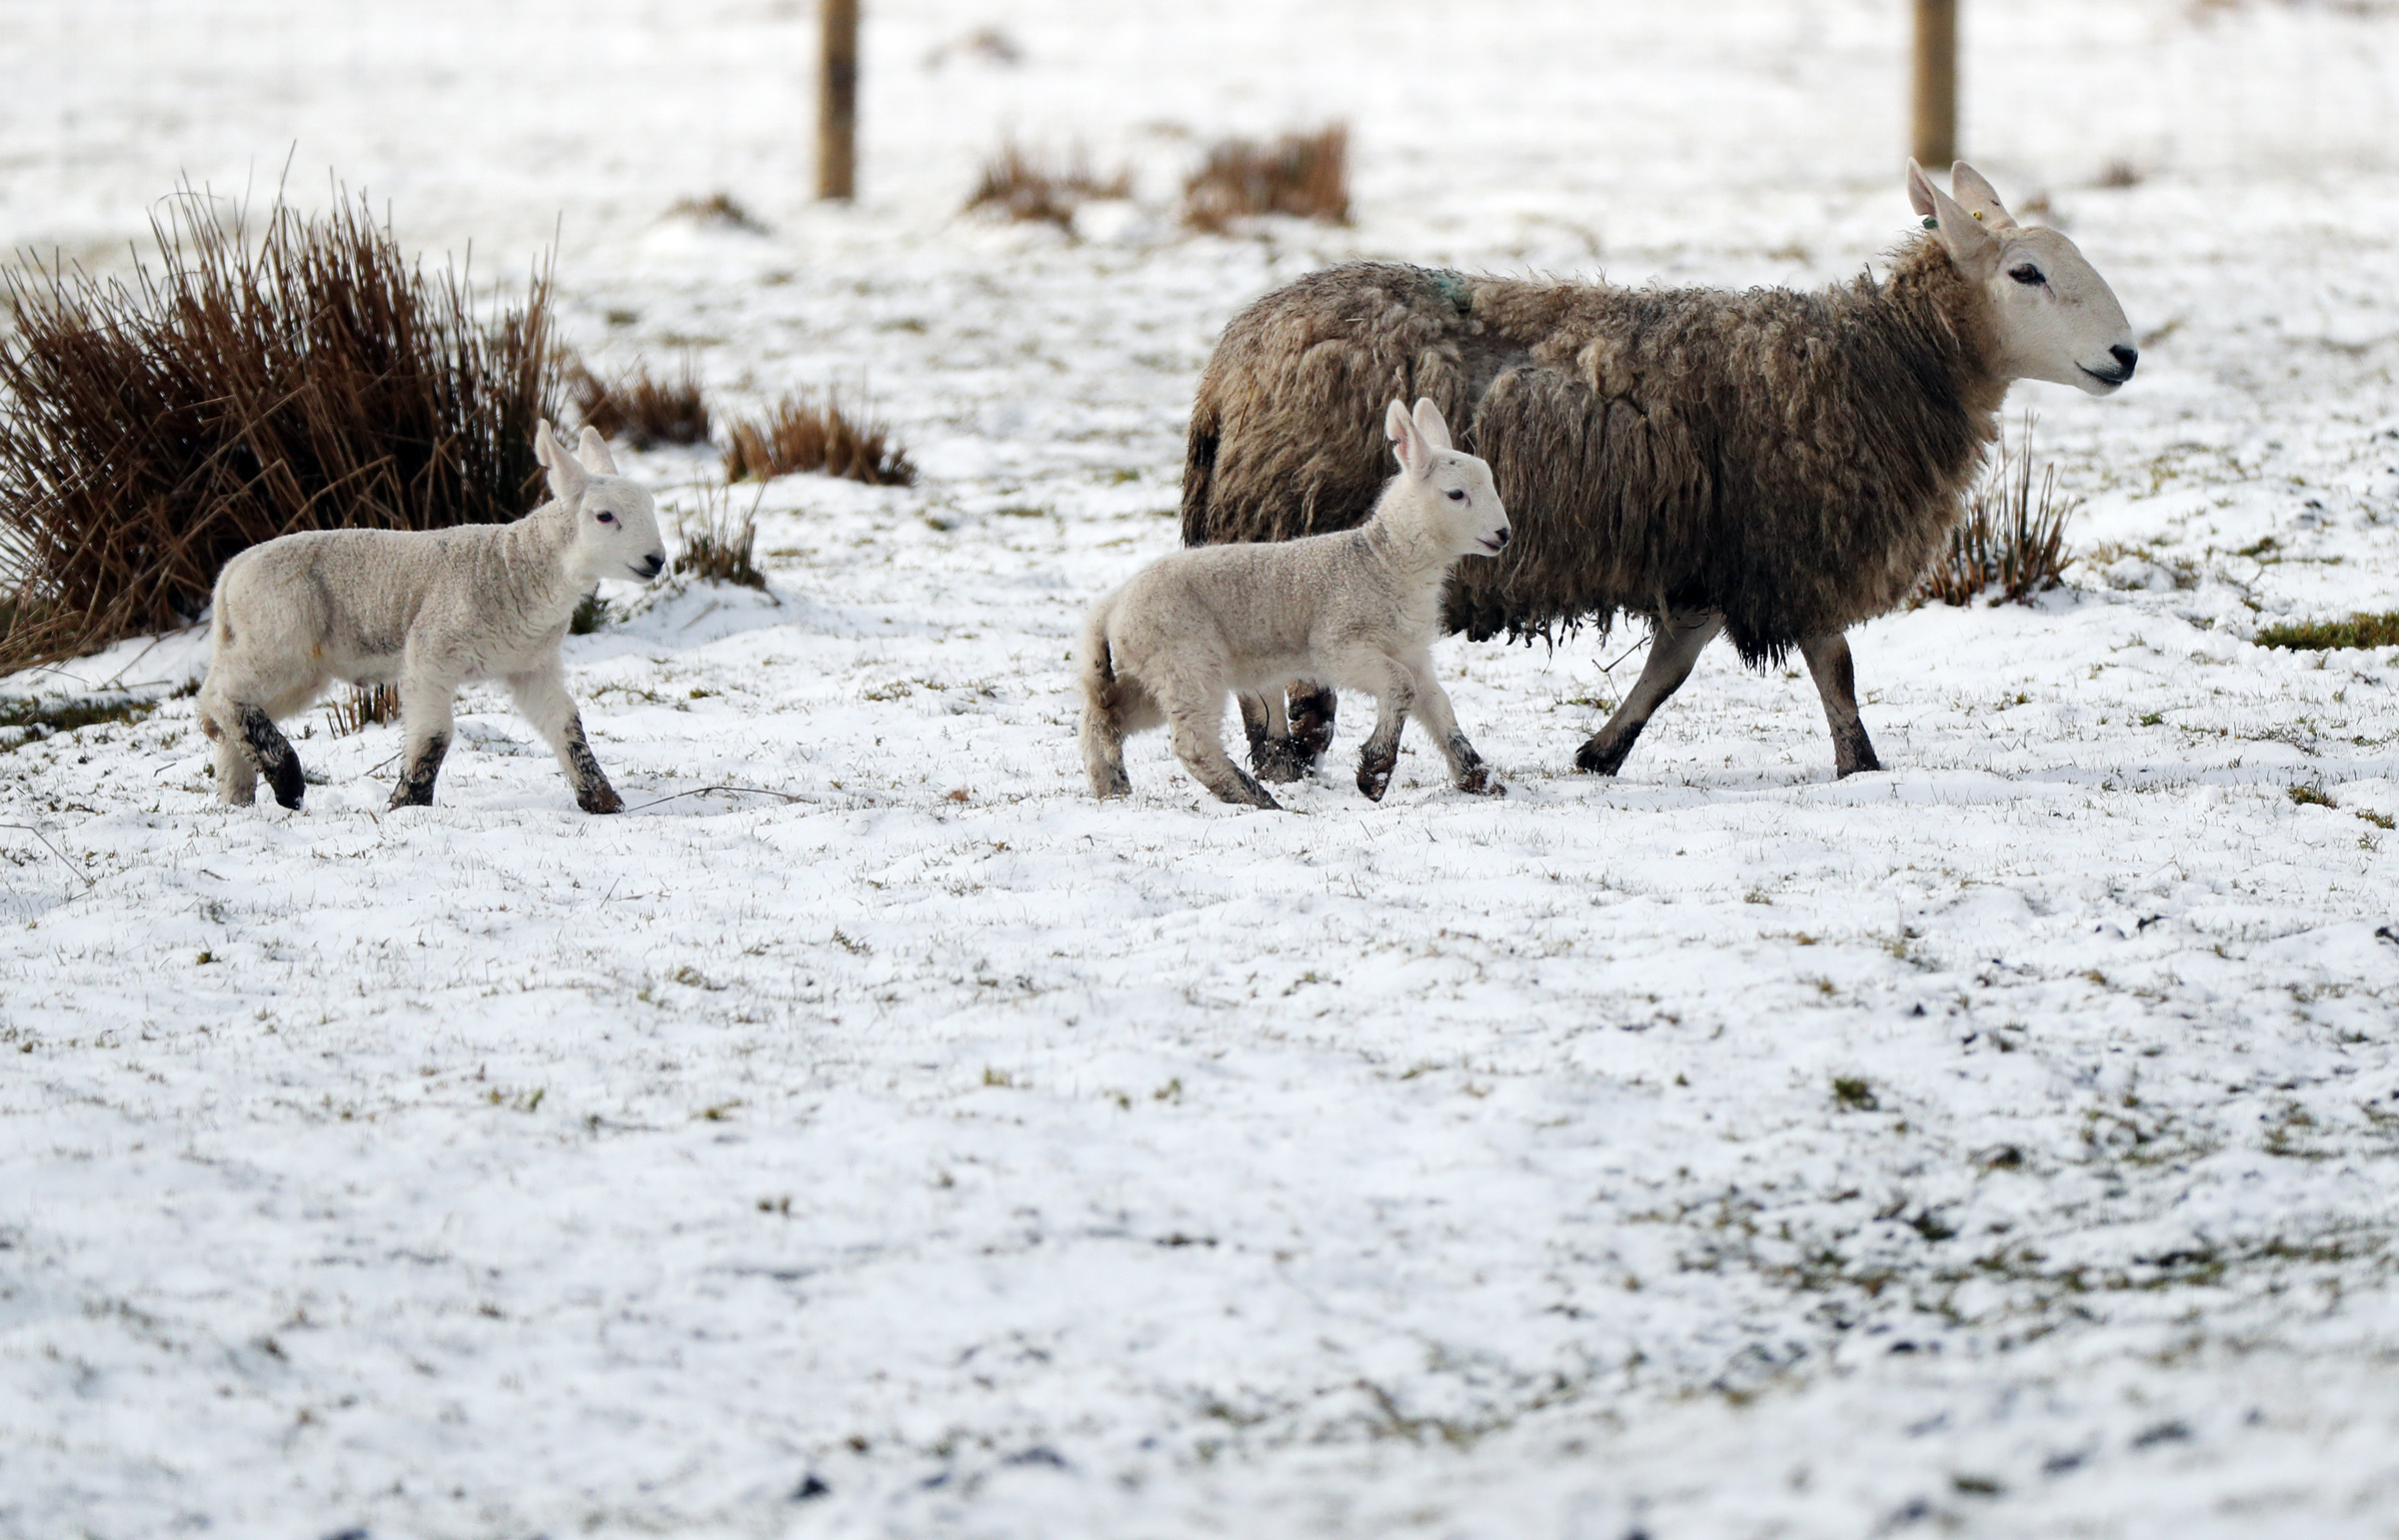 A general view of a sheep and her lambs in snow covered fields close to Nenthead, Cumbria, as forecasters have warned of treacherous driving conditions for Easter holidaymakers with snow and torrential rain on the way. PRESS ASSOCIATION Photo. Picture date: Sunday April 1, 2018. See PA story WEATHER Snow. Photo credit should read: Scott Heppell/PA Wire